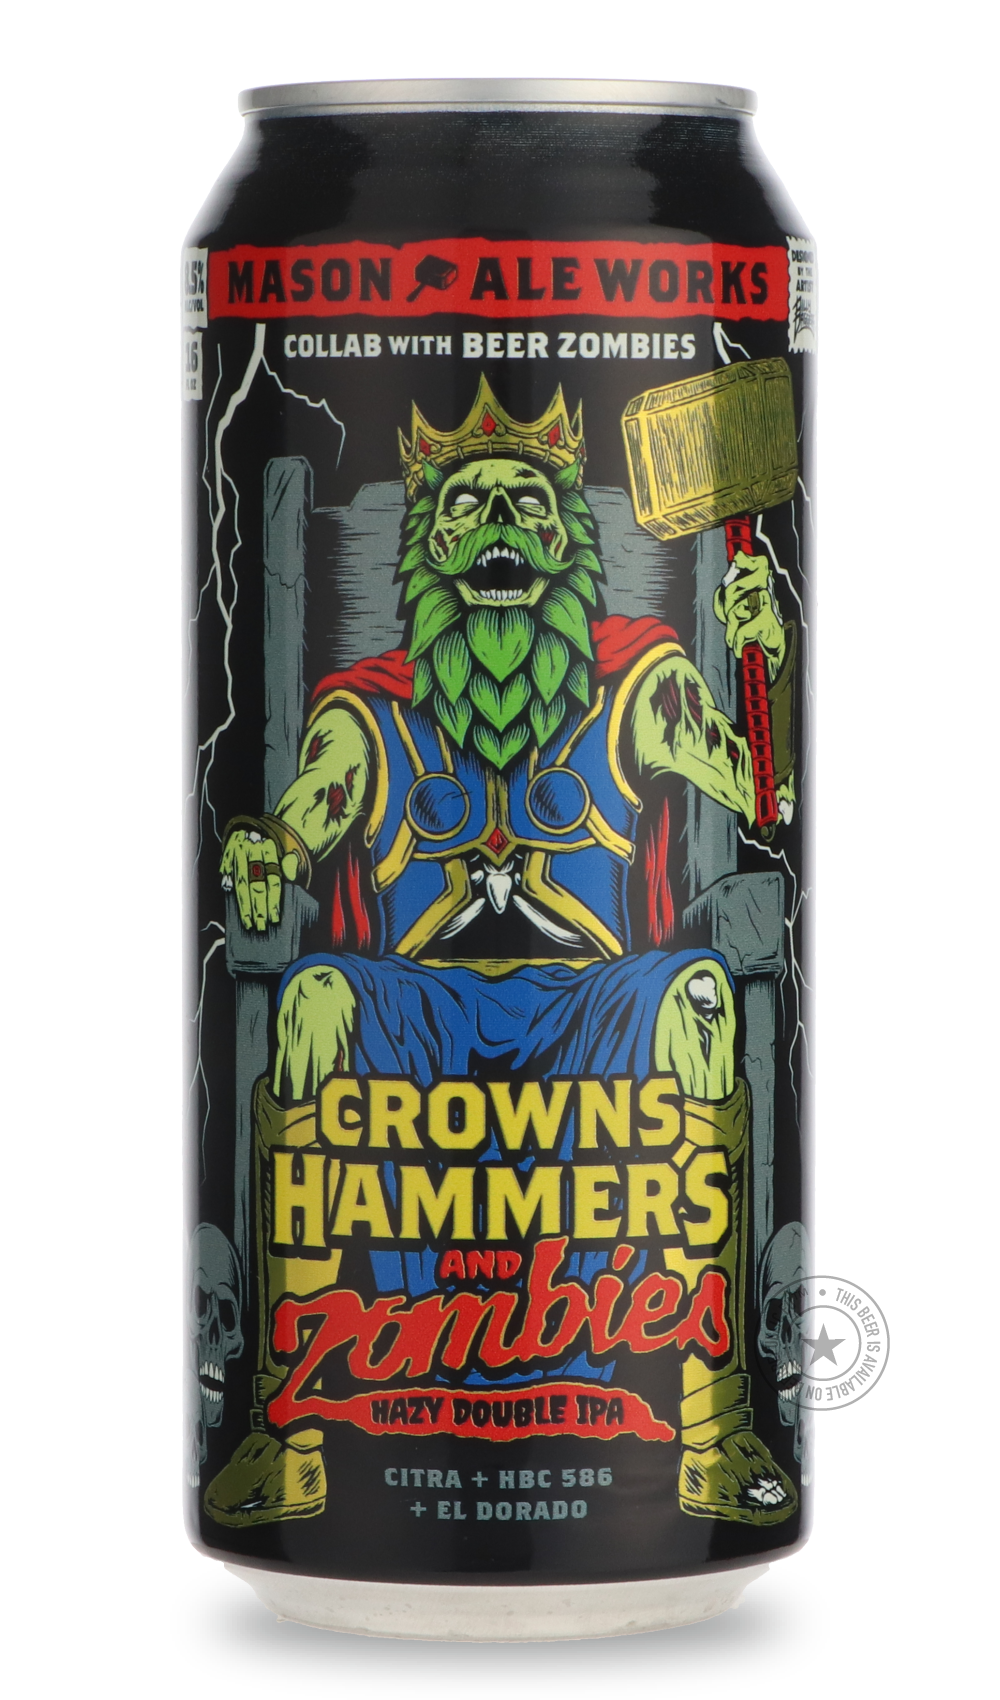 -Mason Ale Works- Crowns, Hammers, And Zombies / Craft Beer Kings & Beer Zombies-IPA- Only @ Beer Republic - The best online beer store for American & Canadian craft beer - Buy beer online from the USA and Canada - Bier online kopen - Amerikaans bier kopen - Craft beer store - Craft beer kopen - Amerikanisch bier kaufen - Bier online kaufen - Acheter biere online - IPA - Stout - Porter - New England IPA - Hazy IPA - Imperial Stout - Barrel Aged - Barrel Aged Imperial Stout - Brown - Dark beer - Blond - Blon